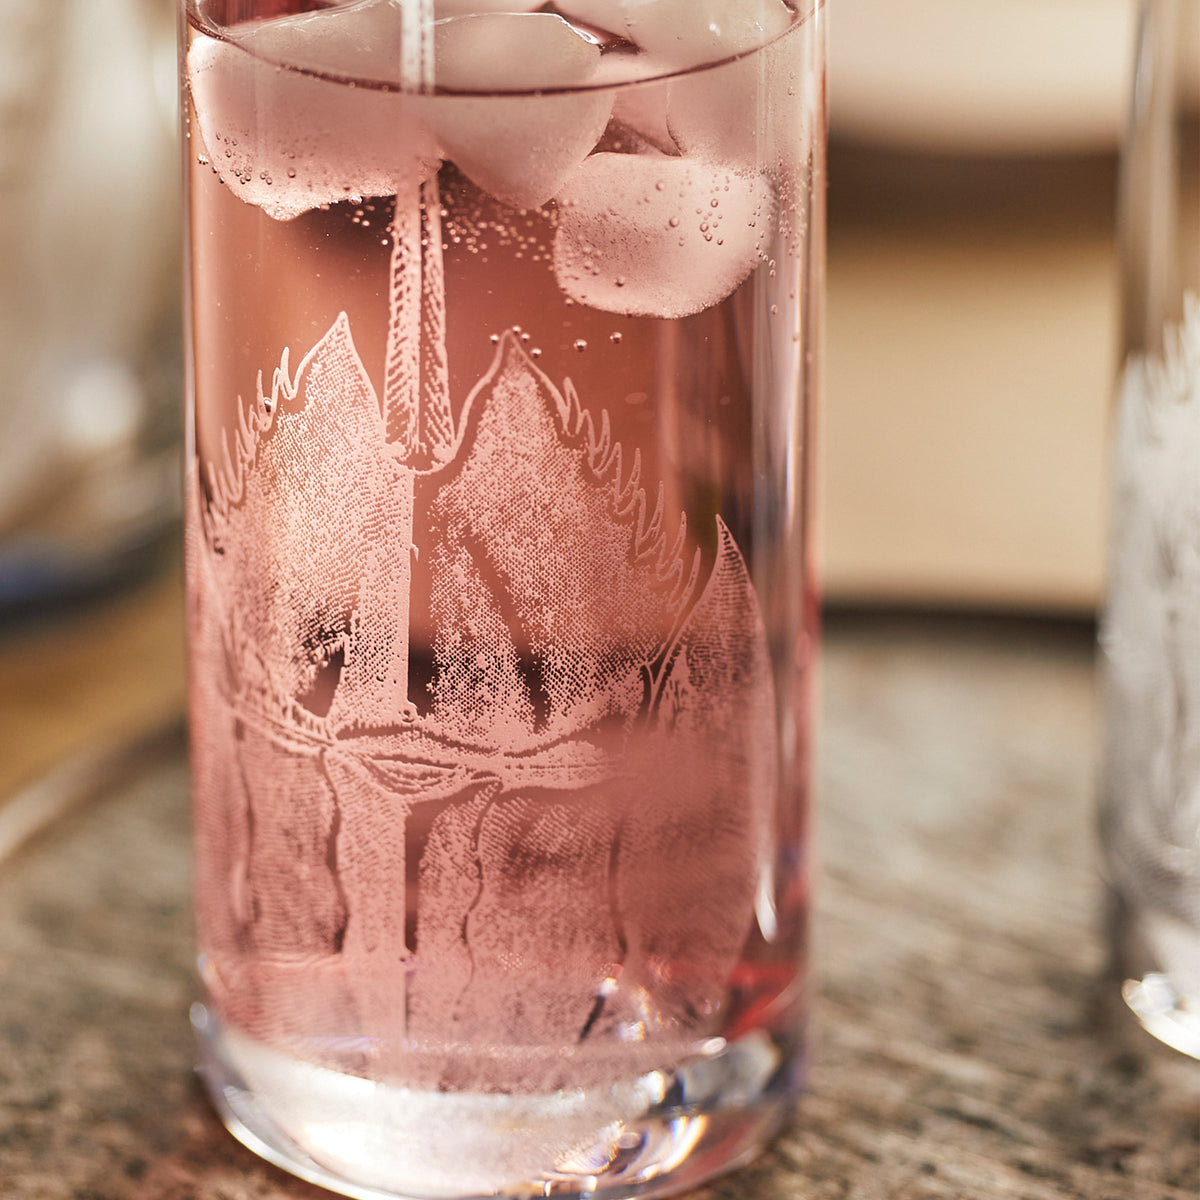 A Caskata Horseshoe Crab Highball Glass filled with a pink liquid and ice.